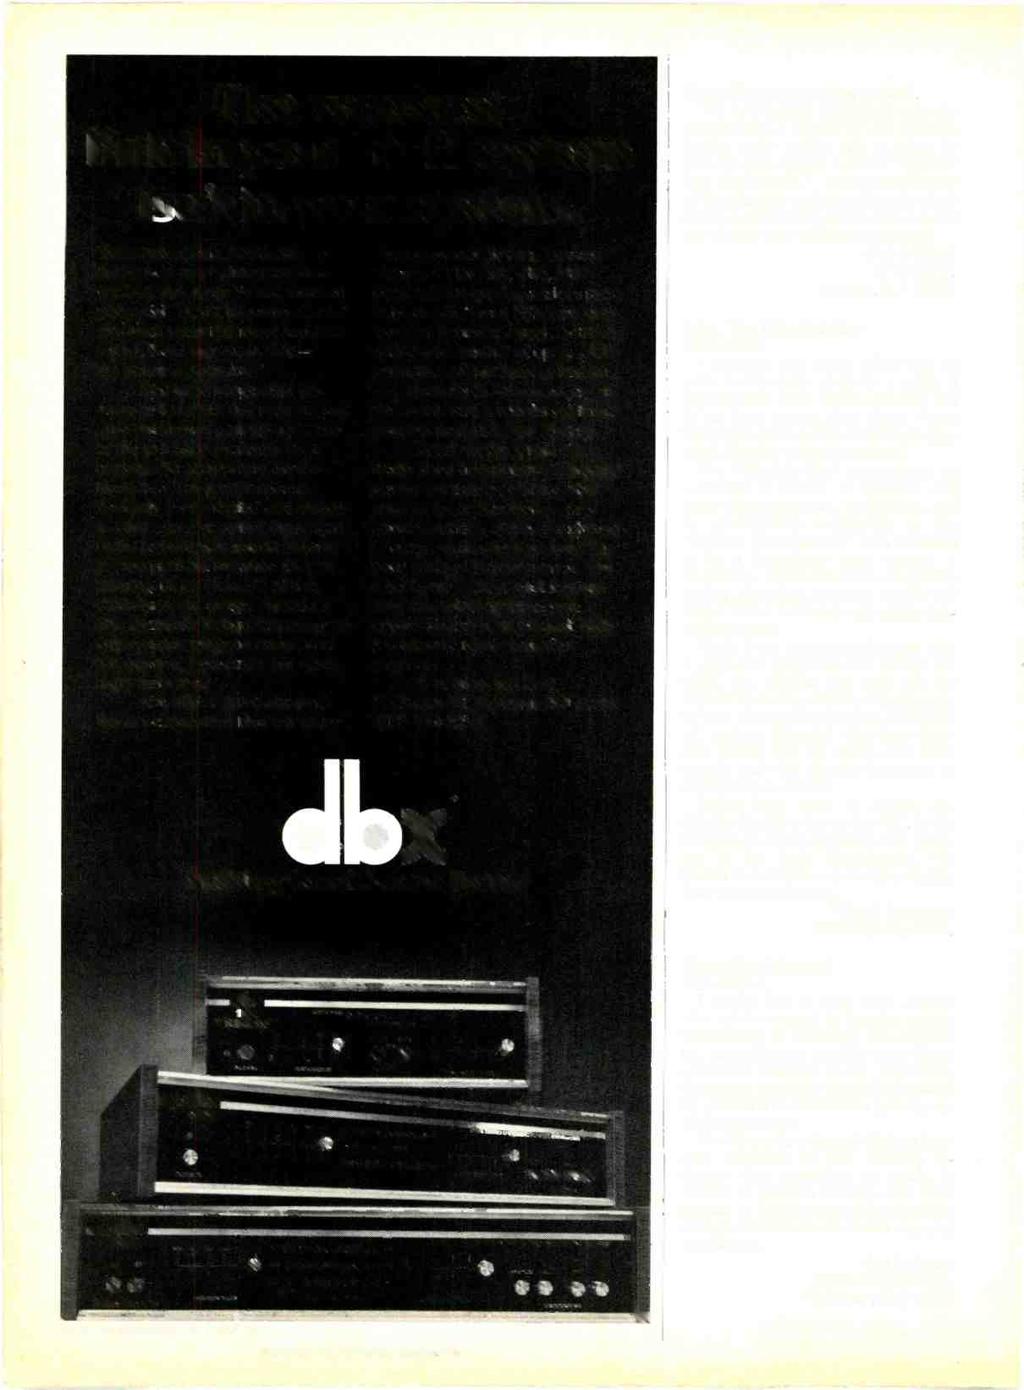 ( rr i AmericanRadioHistory.Com 34 The weakest link in your hi-fi system isn't in your system. You coukl spend thousands of dollars on your stereo system and stil not hear its full musical potential.